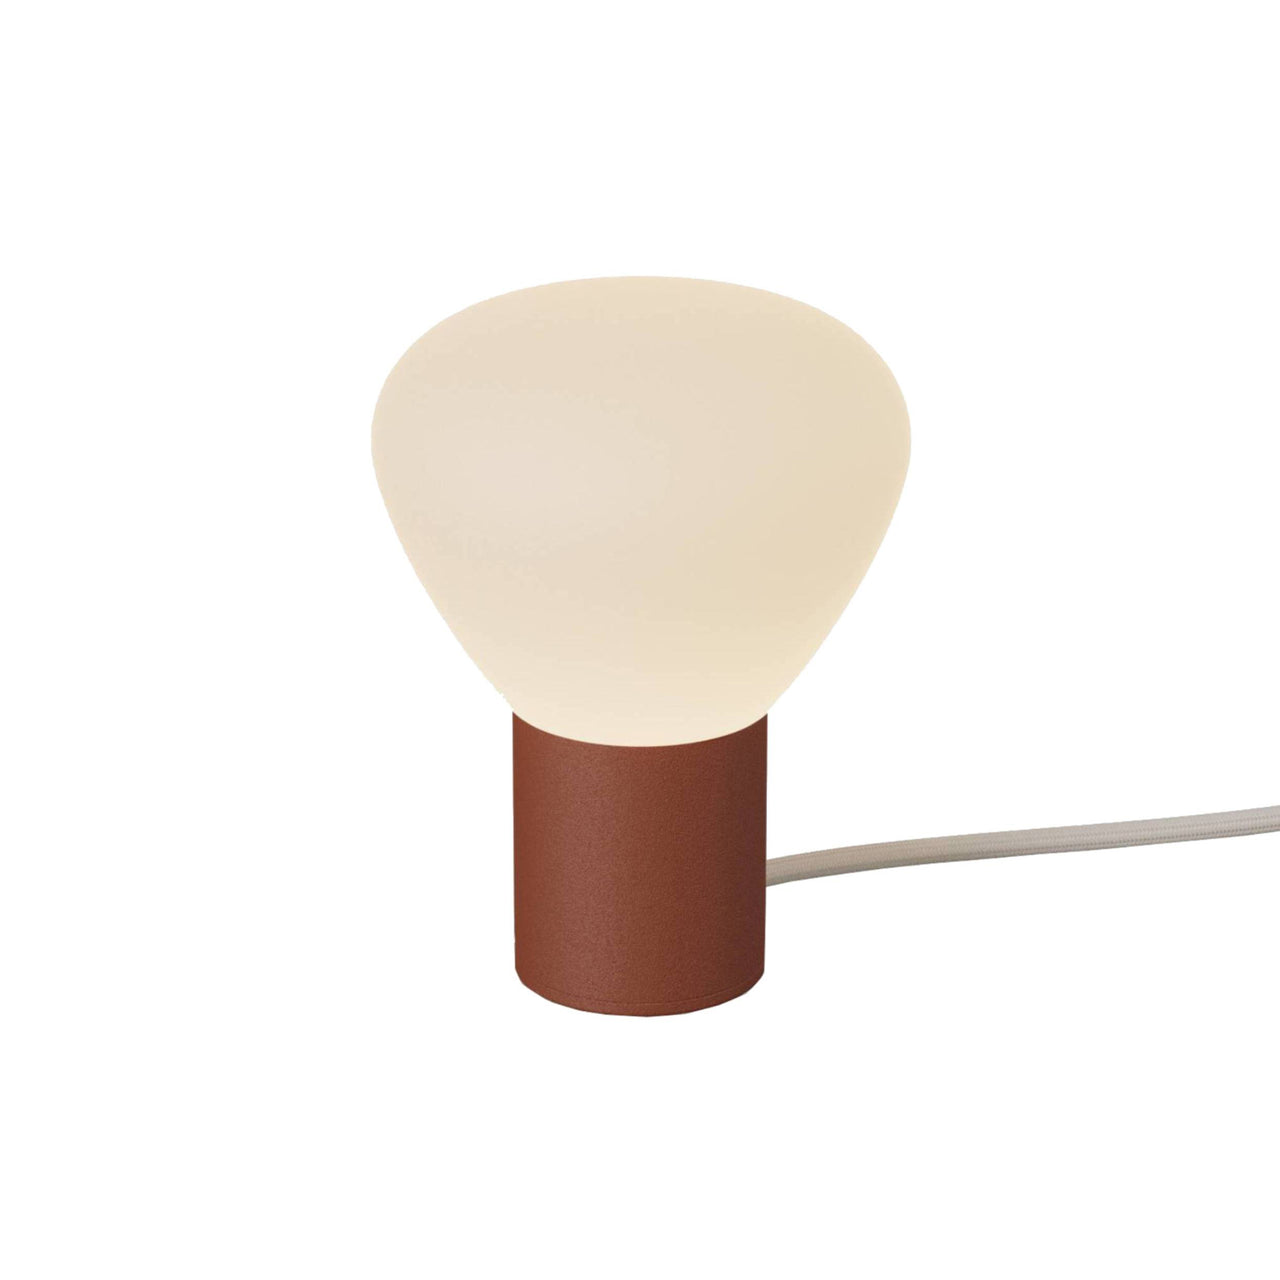 Parc 01 Table Lamp: Handswitch +  Terracotta + Beige